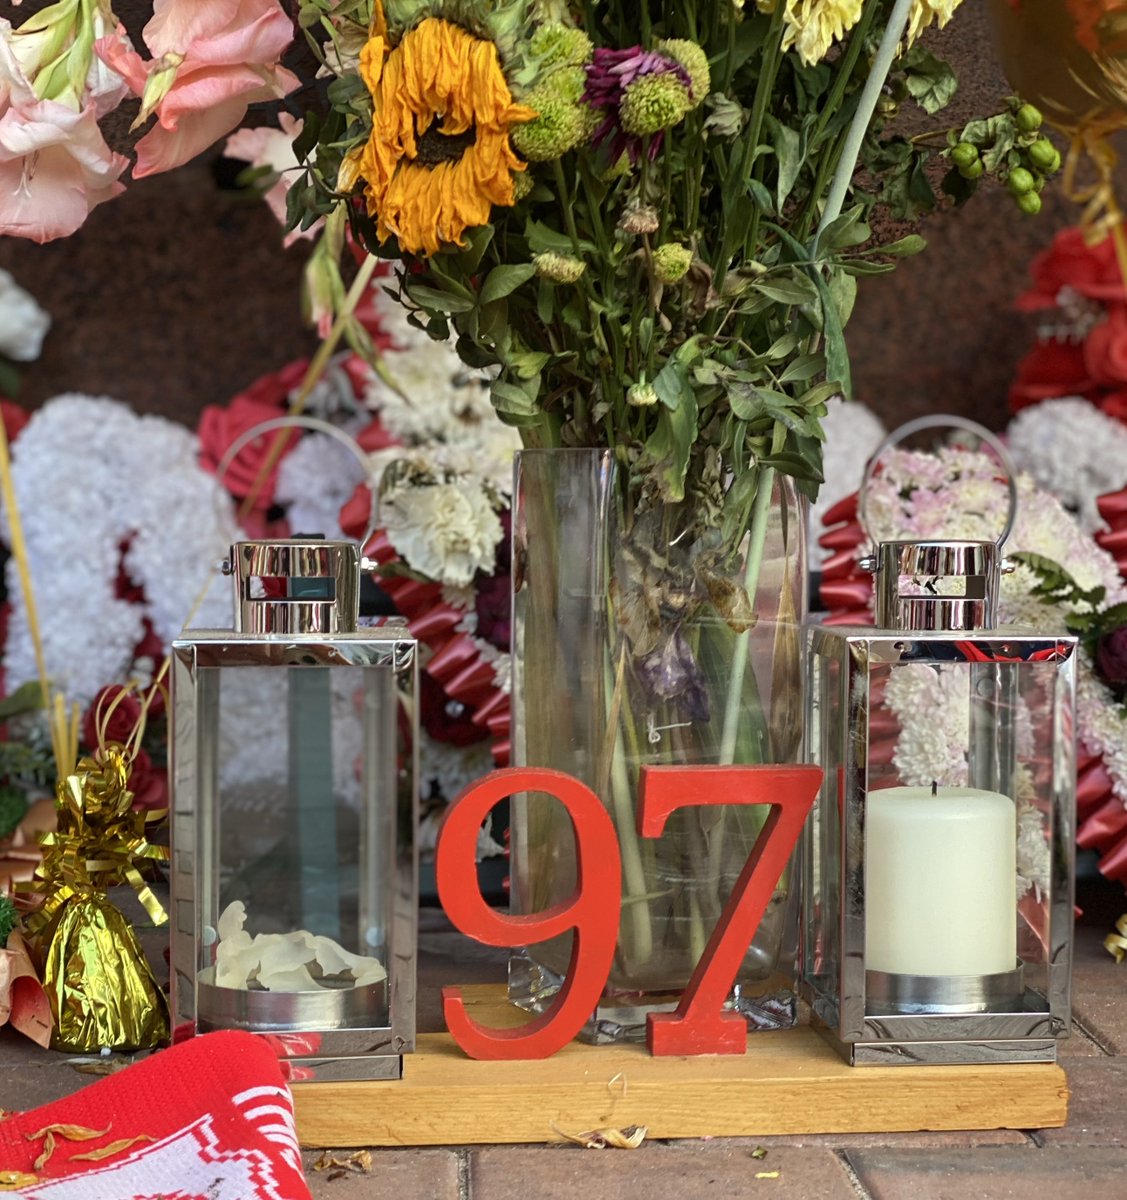 In remembrance of the 9️⃣7️⃣ supporters who went to watch their much loved #Liverpoolfc but never came home . ❤️ May they rest in peace and never be forgotten.🙏🏼 John Anderson, 62 Colin Ashcroft, 19 James Aspinall, 18 Kester Ball, 16 Gerard Baron, 67 Simon Bell, 17 Barry…